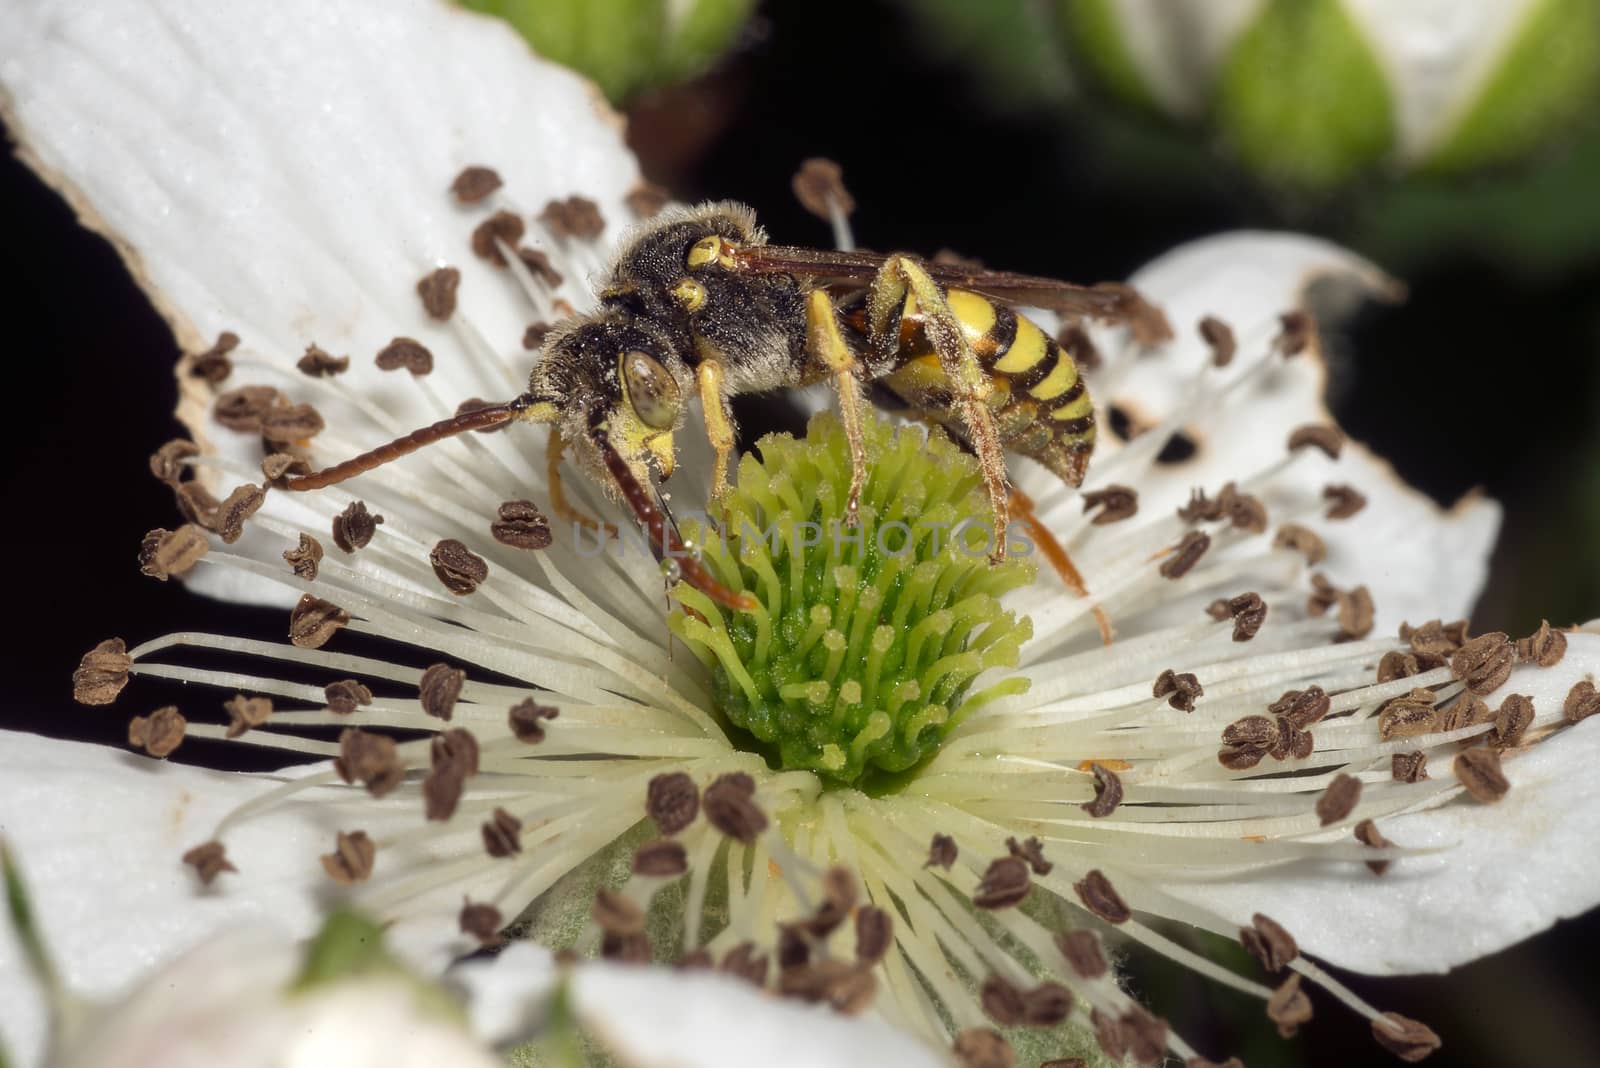 Close-up of a hornet or wasp feeding on a white flower